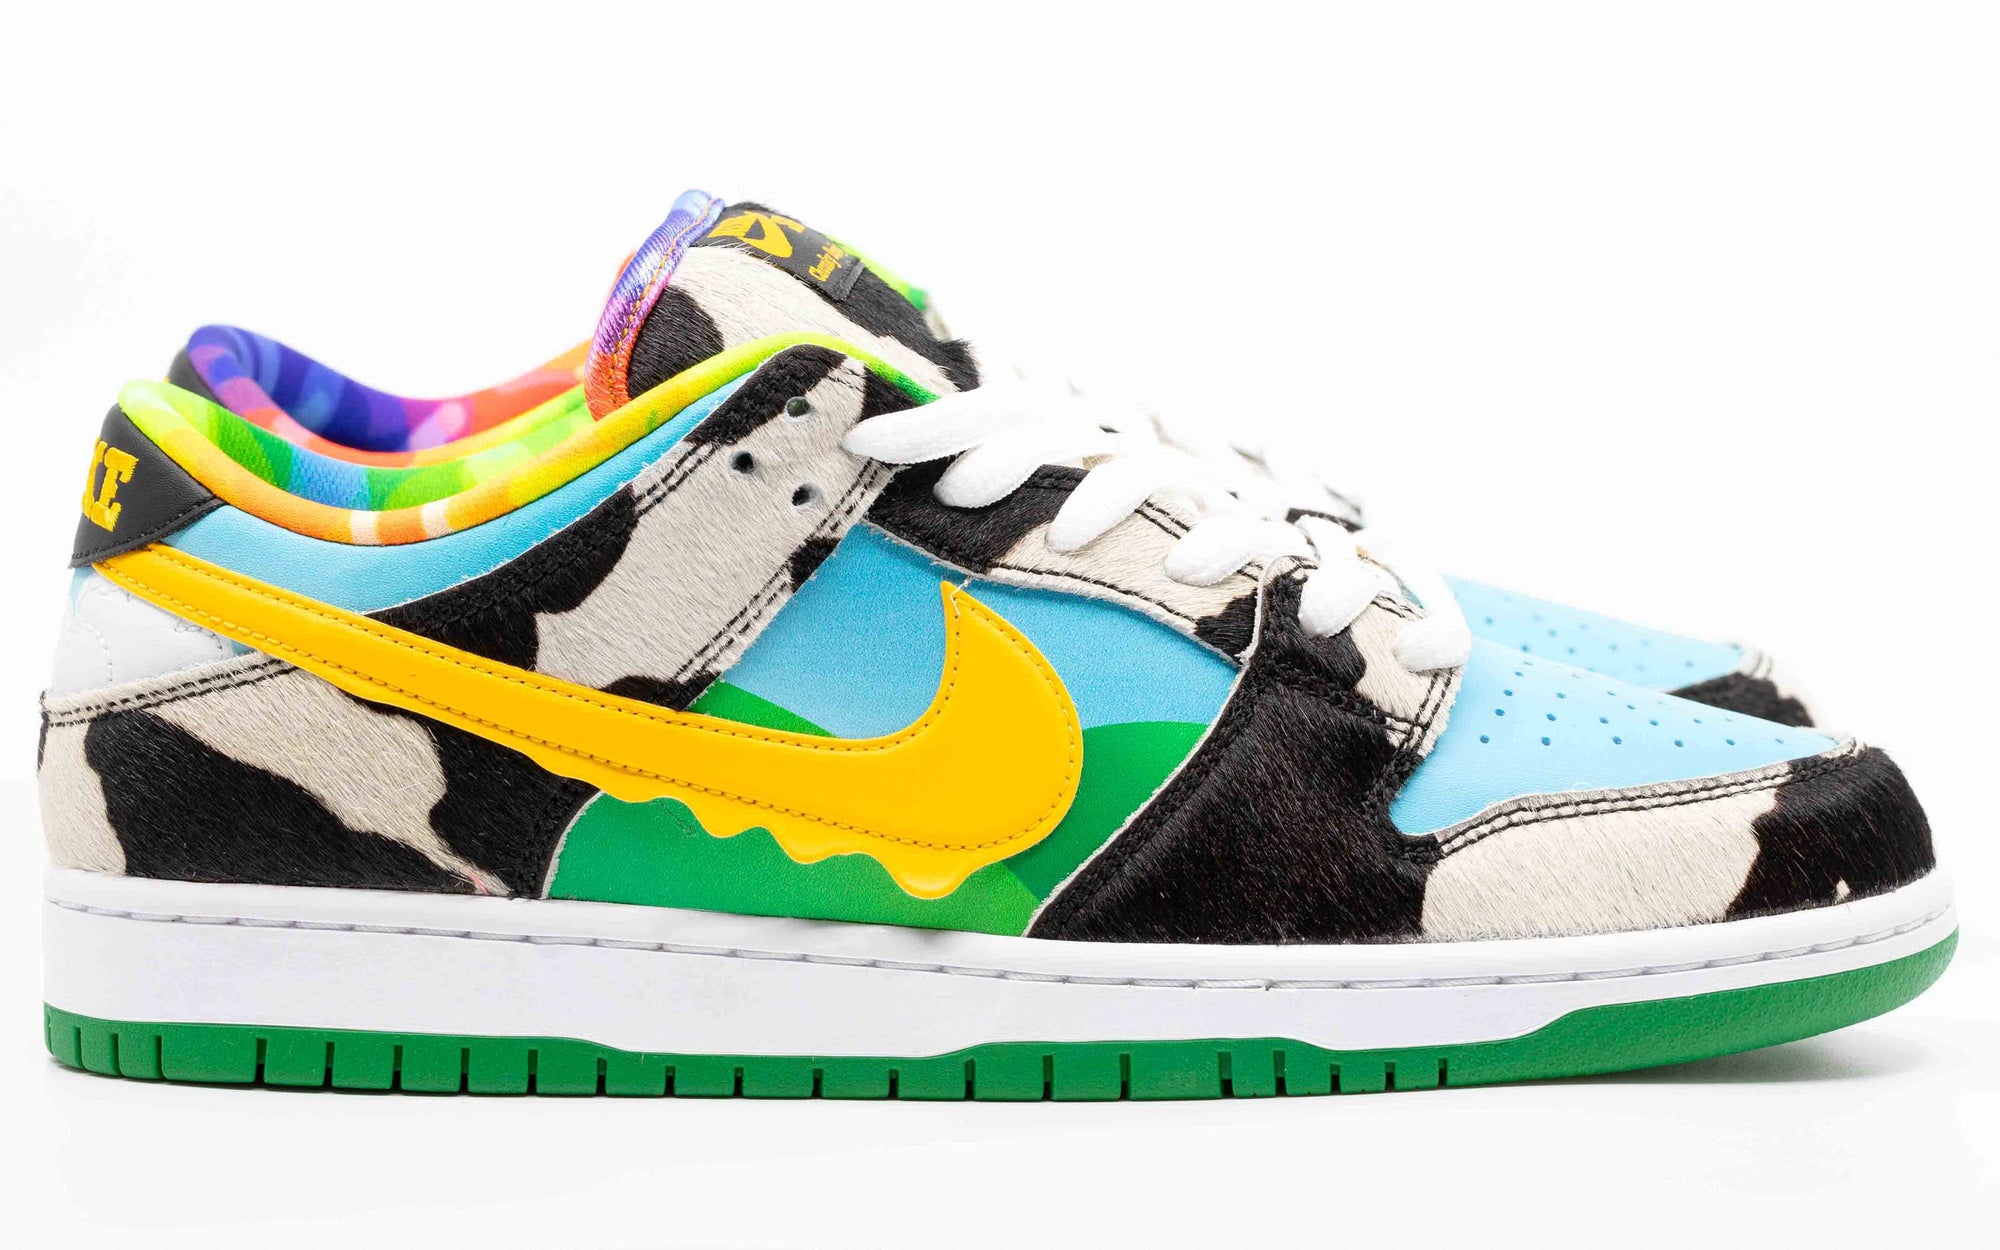 Nike SB Dunk Low "Ben & Jerry's Chunky Dunky" (2020)